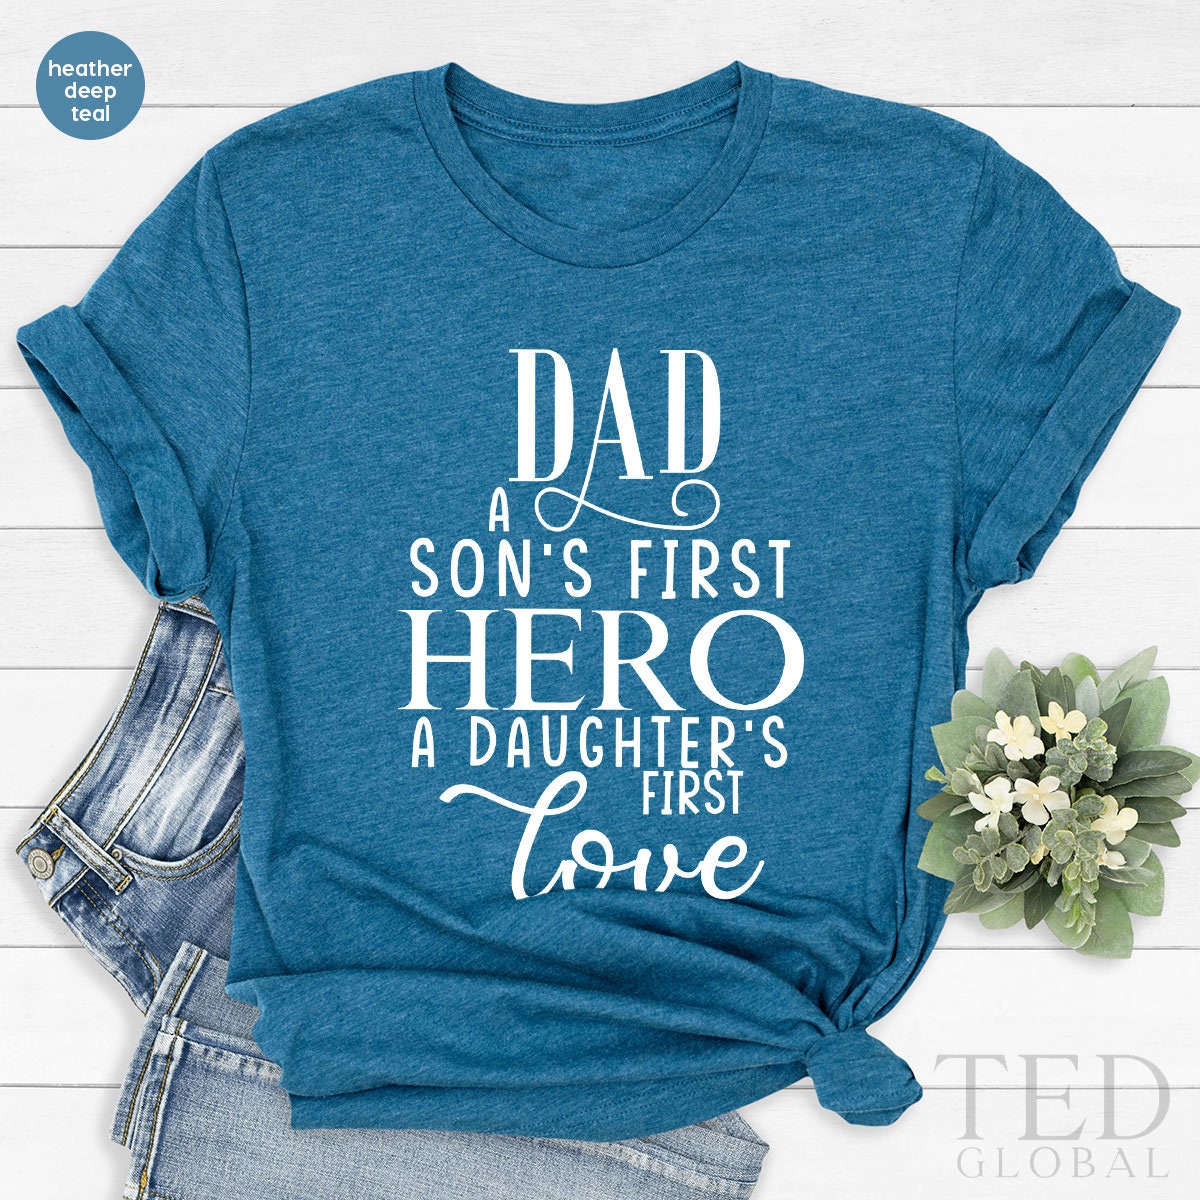 Dad Shirt, Sons First Hero Shirt, Fathers Day Shirt, Best Dad Shirt, Gifts For Dad From Daughter, Dad Birthday Gift, Girl Dad Shirt - Fastdeliverytees.com